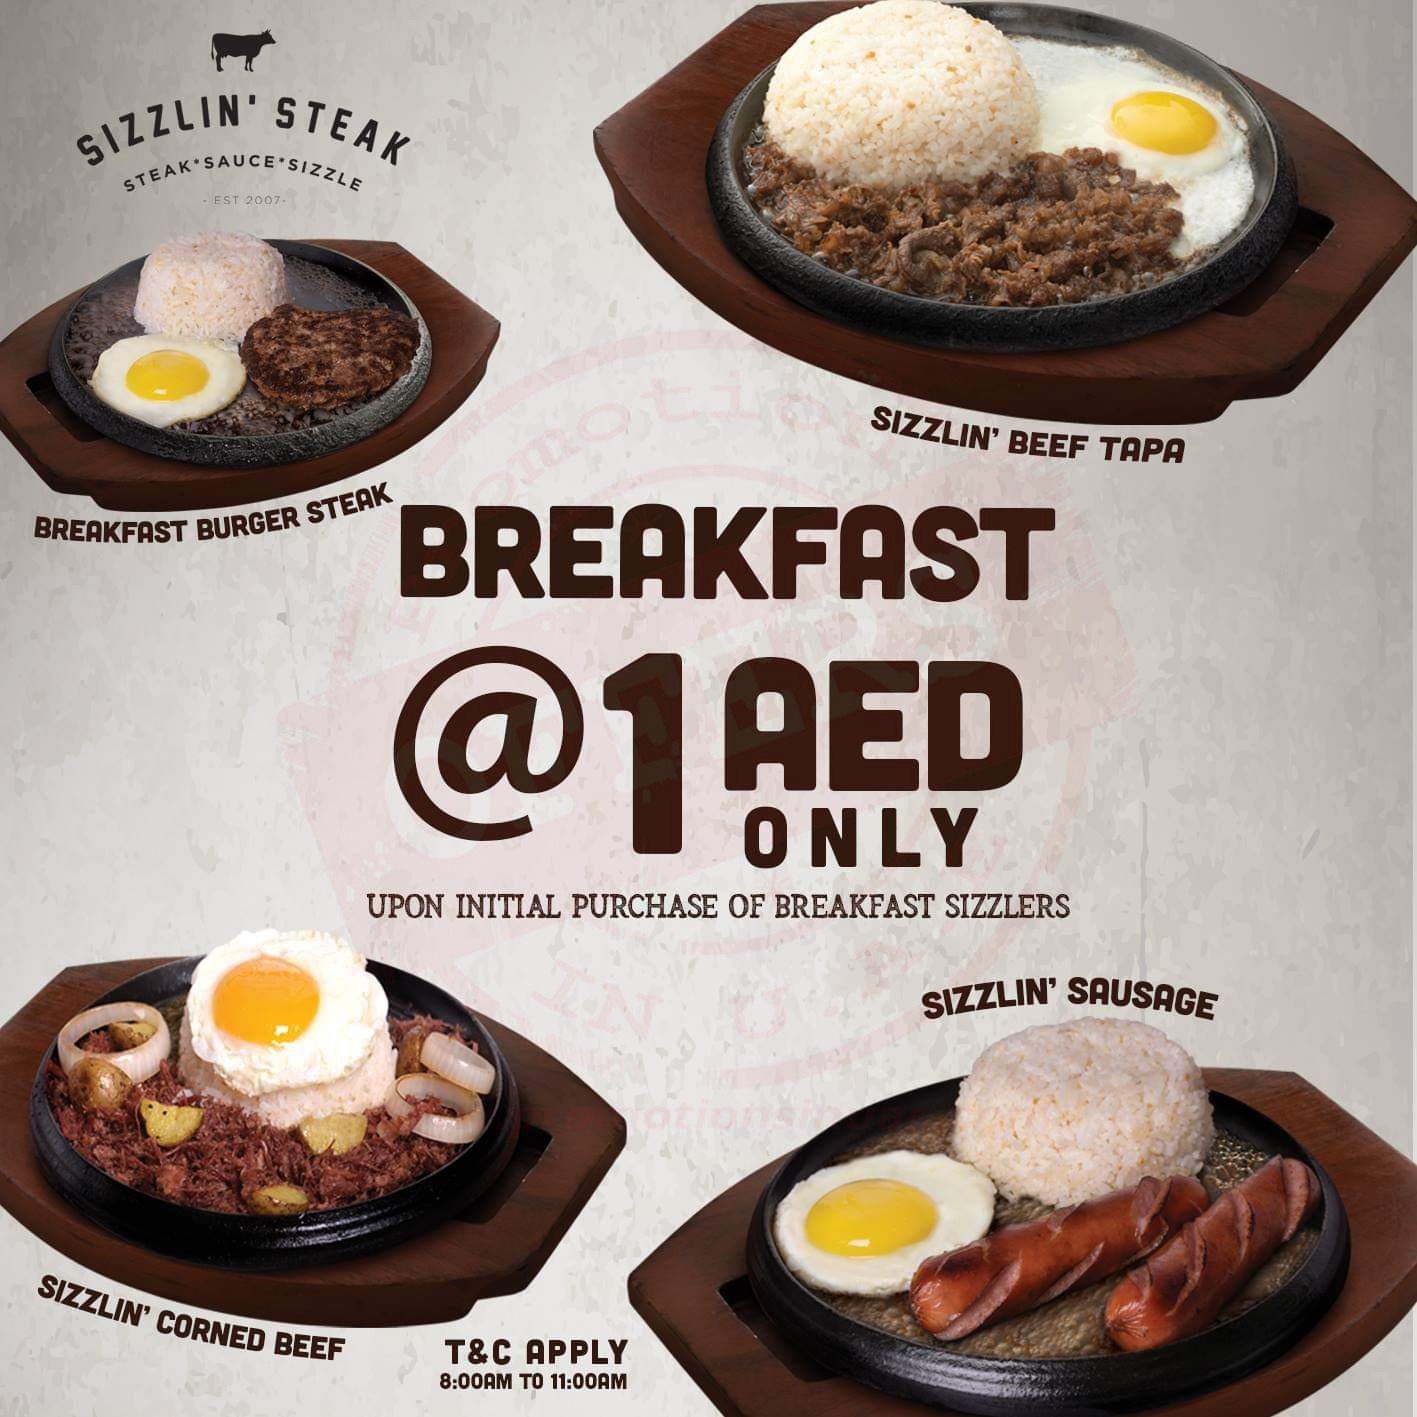 Begin your day with a scrumptious breakfast meal for 1 AED only from Teriyaki Boy & Sizzlin’ Steak UAE at #BurJuman